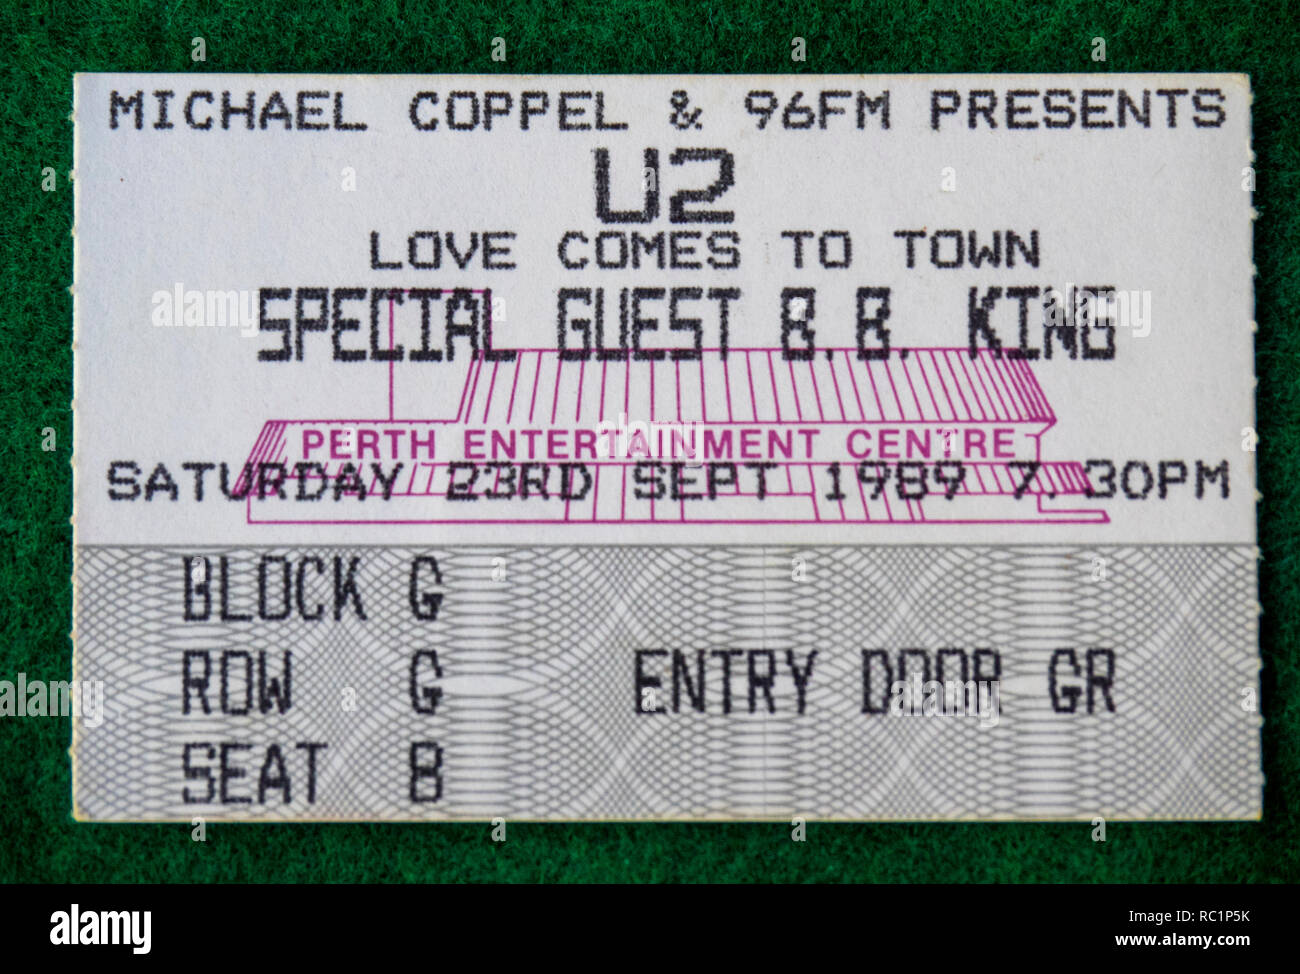 Ticket for U2 Love Comes to Town Tour with BB King concert at Perth Entertainment Centre in 1989 WA Australia. Stock Photo